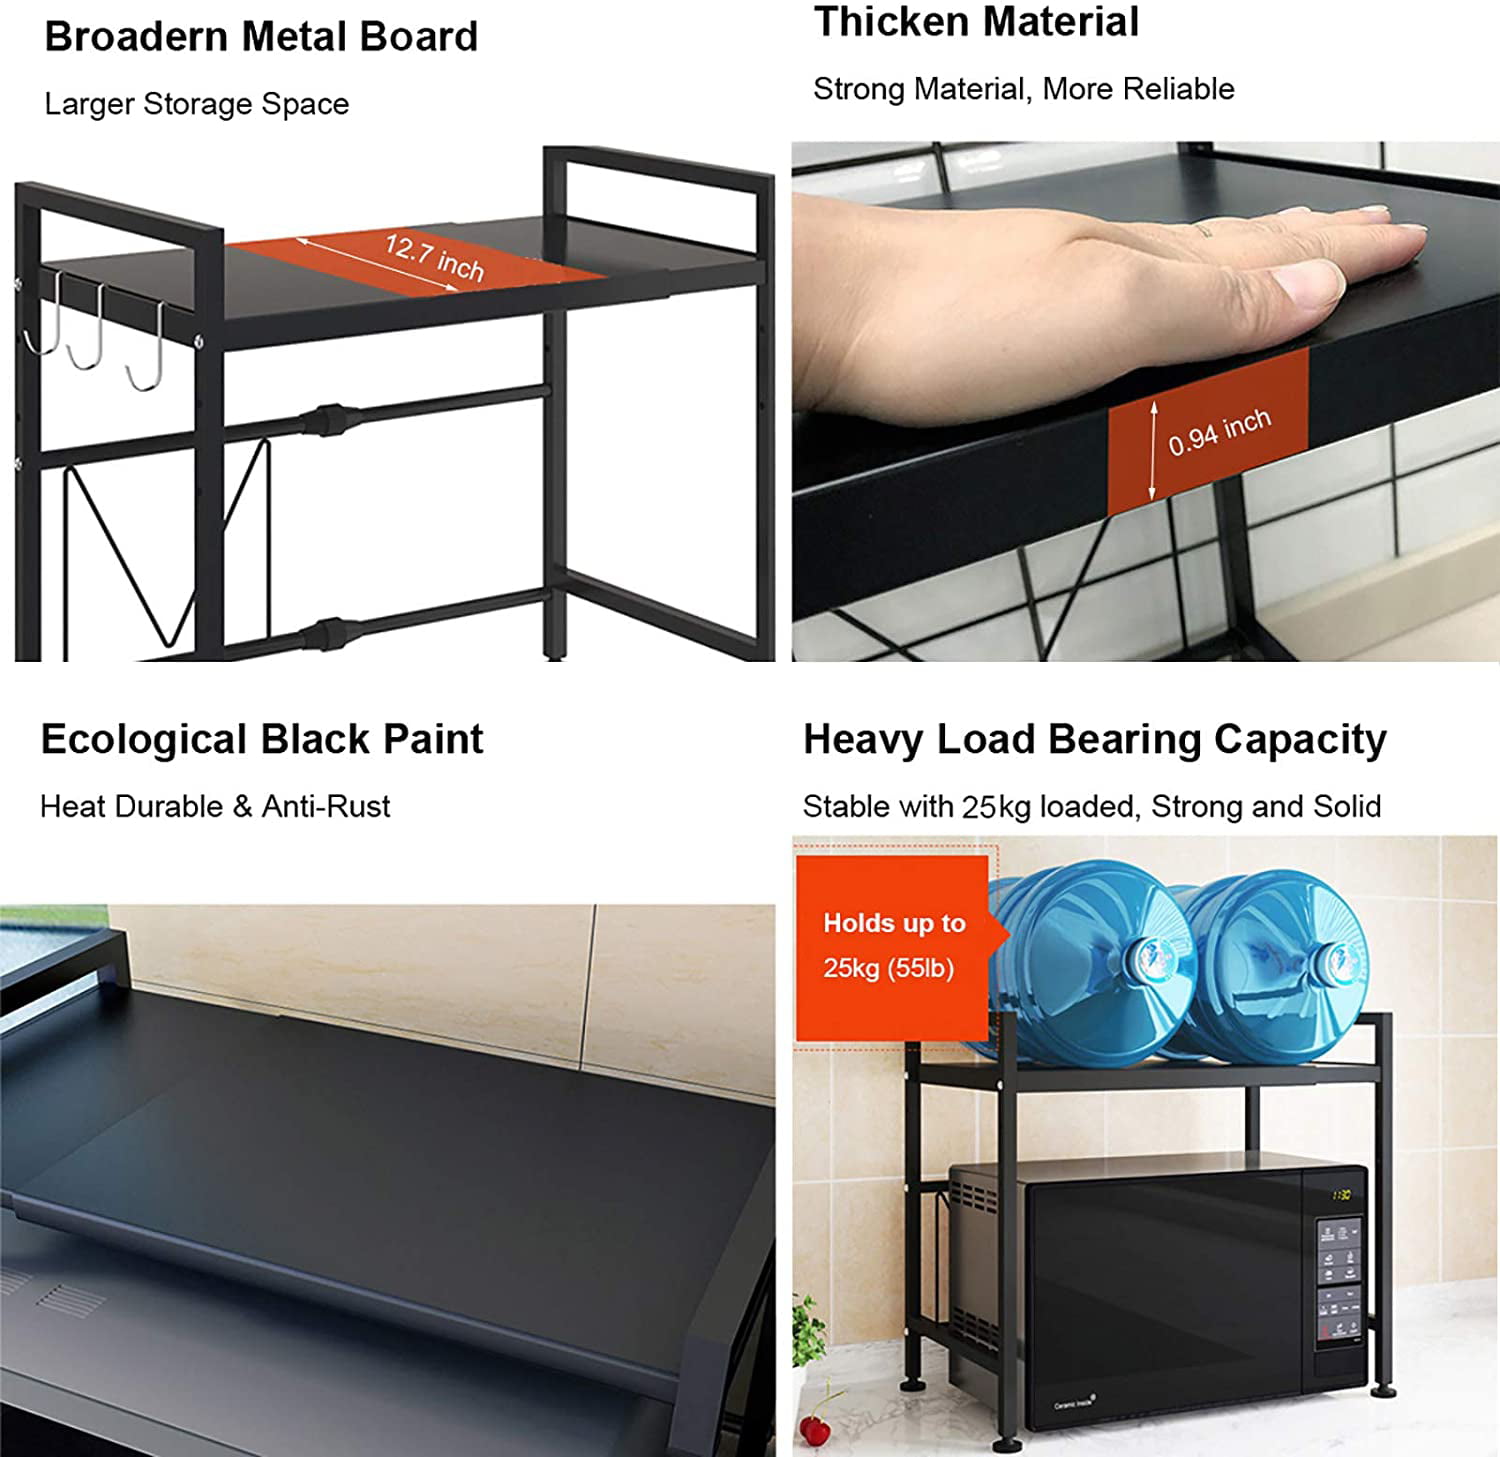 Expandable and Width Adjustable Microwave Shelf 2-Tier Kitchen Counter Shelf and Organizer with 3 Hooks Carbon Steel Matte Black Whifea Microwave Oven Rack 55lbs Weight Capacity